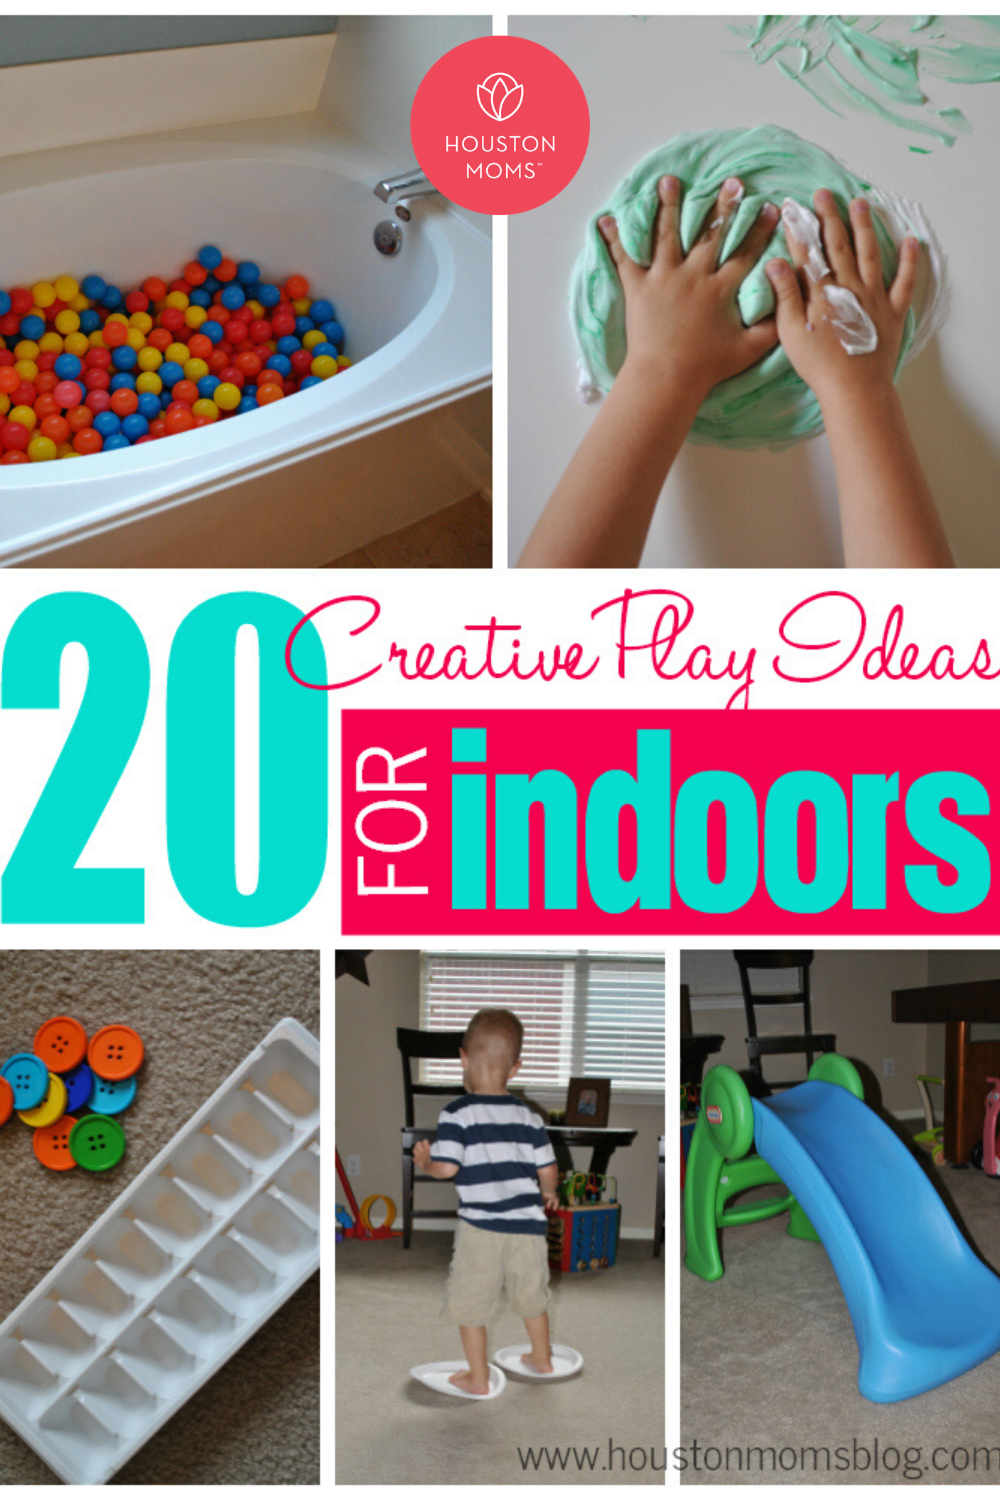 Houston Moms "20 Creative Play Ideas for Indoors" #houstonmoms #houstonmomsblog #momsaroundhouston